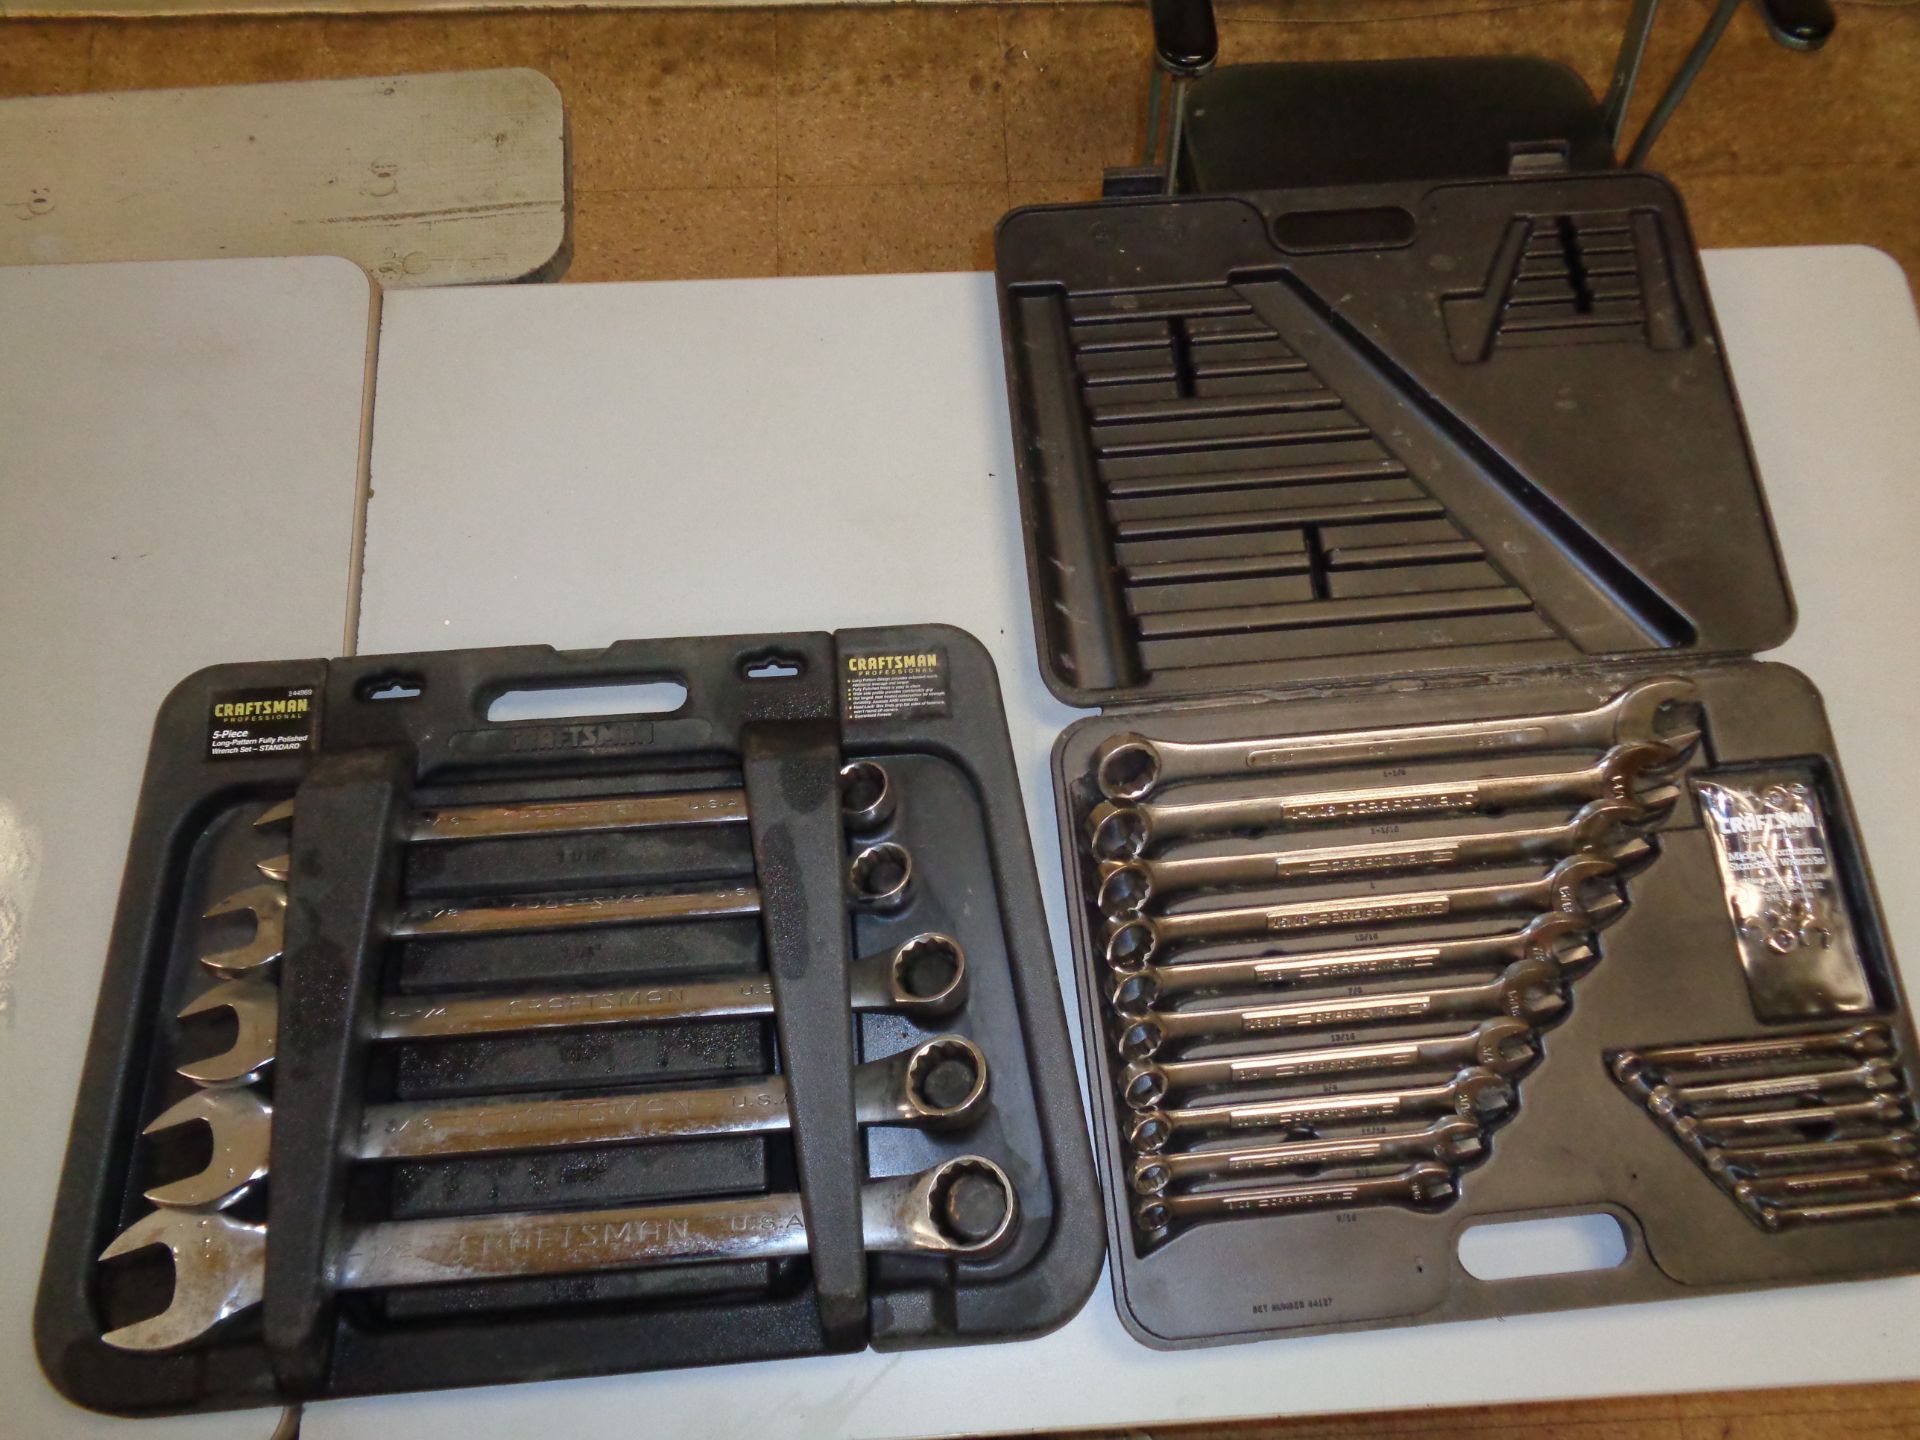 Craftsman 26pc and 5pc Wrench Sets up to 1 1/2"